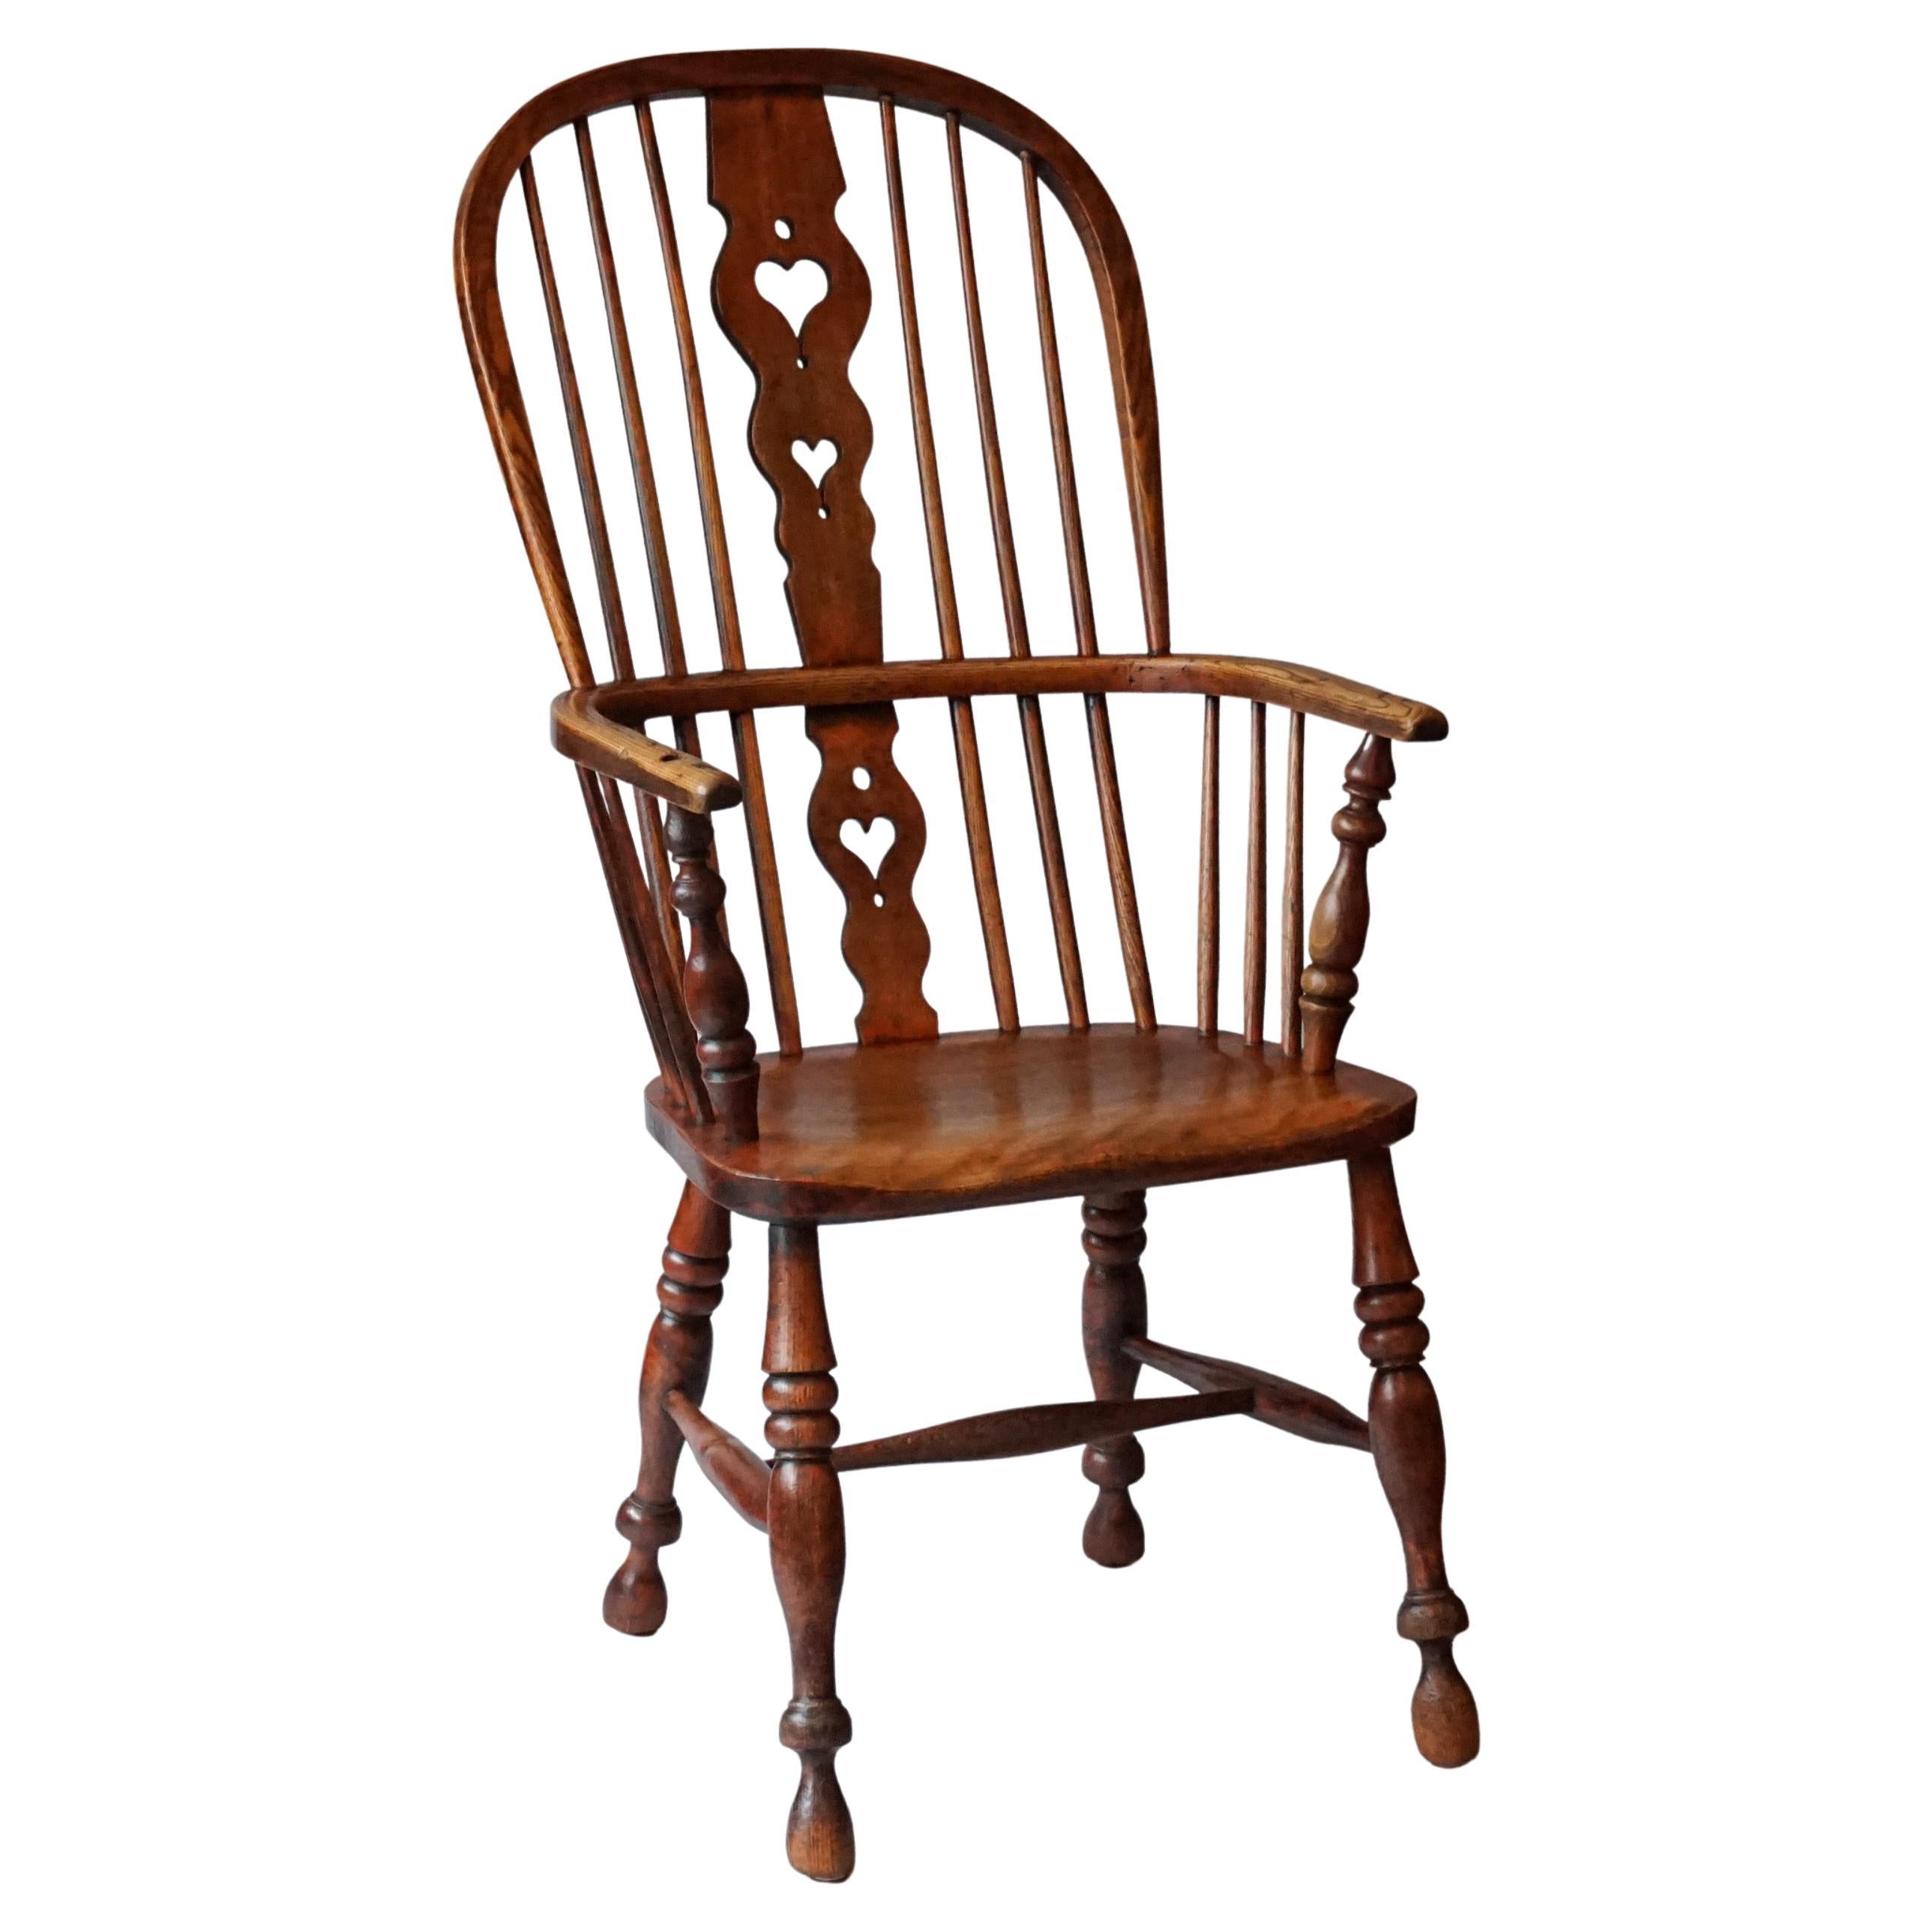 What is a comb back chair?